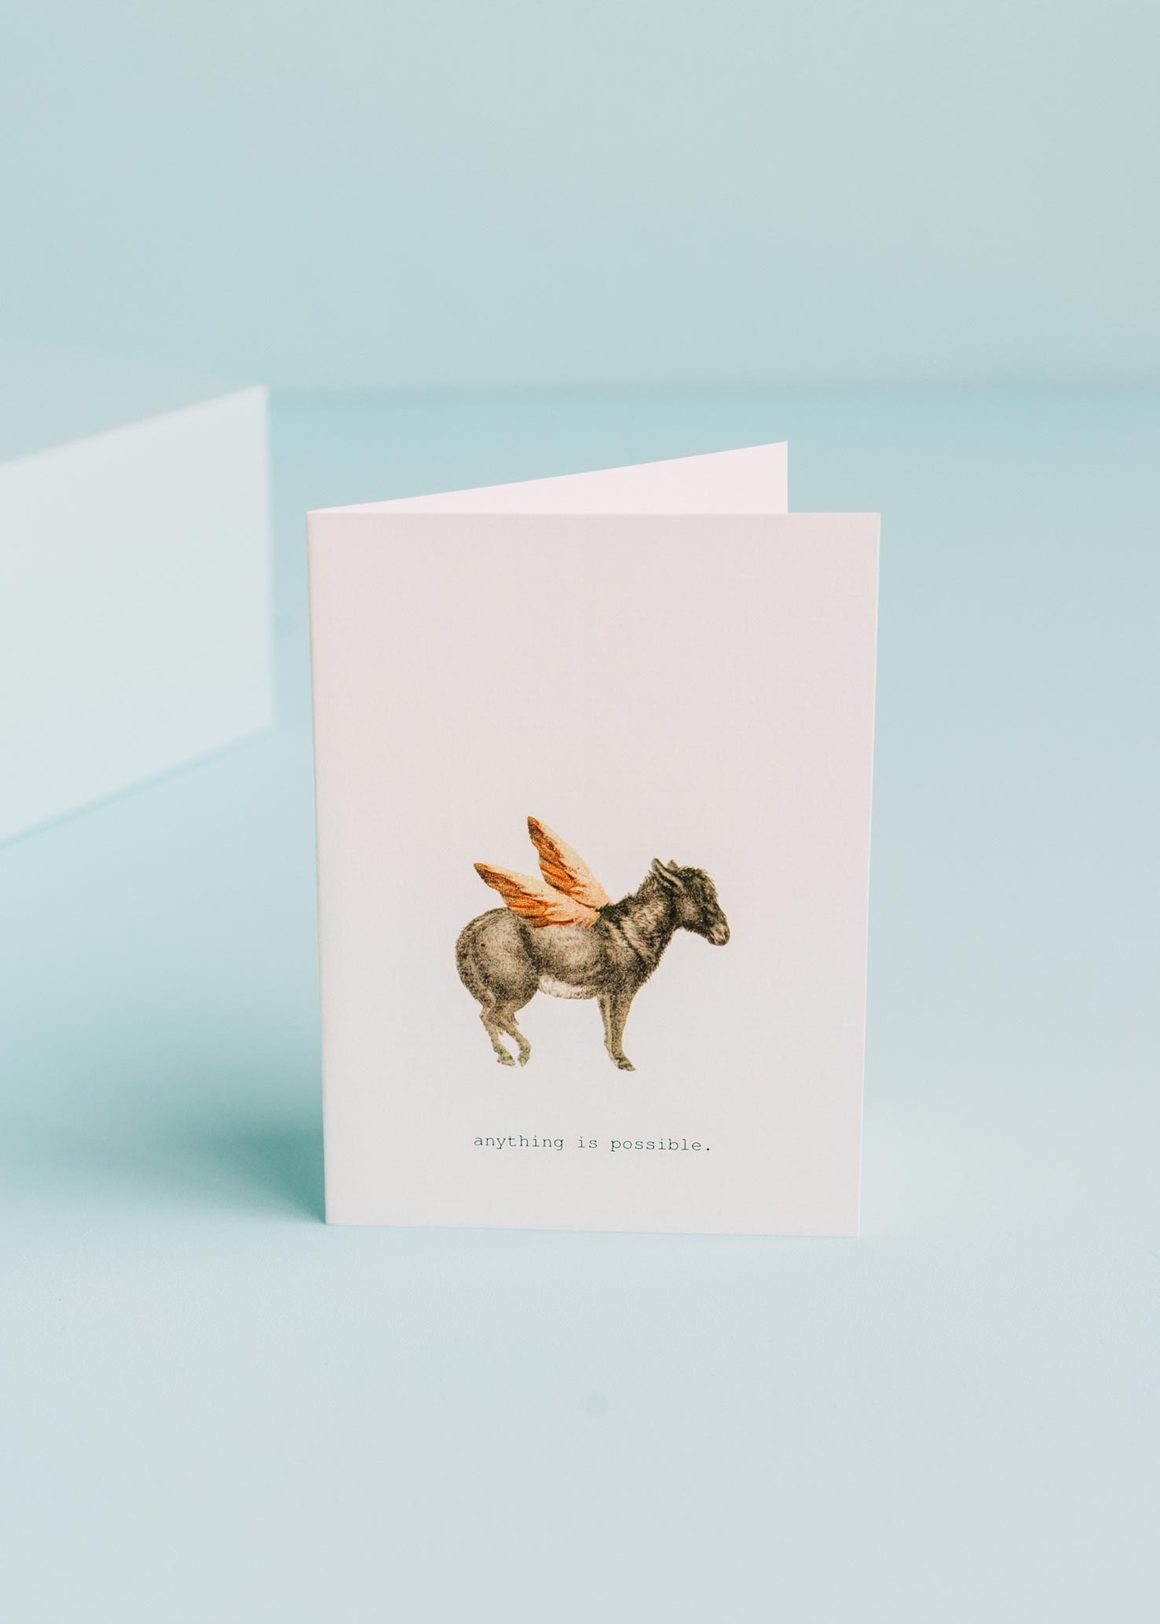 A TokyoMilk Greeting Card - Anything is Possible with a whimsical drawing of a winged donkey stands open on a light blue background, hand-glittered accents sparkling around the edges, and the text "anything is possible." Created by Margot Elena.